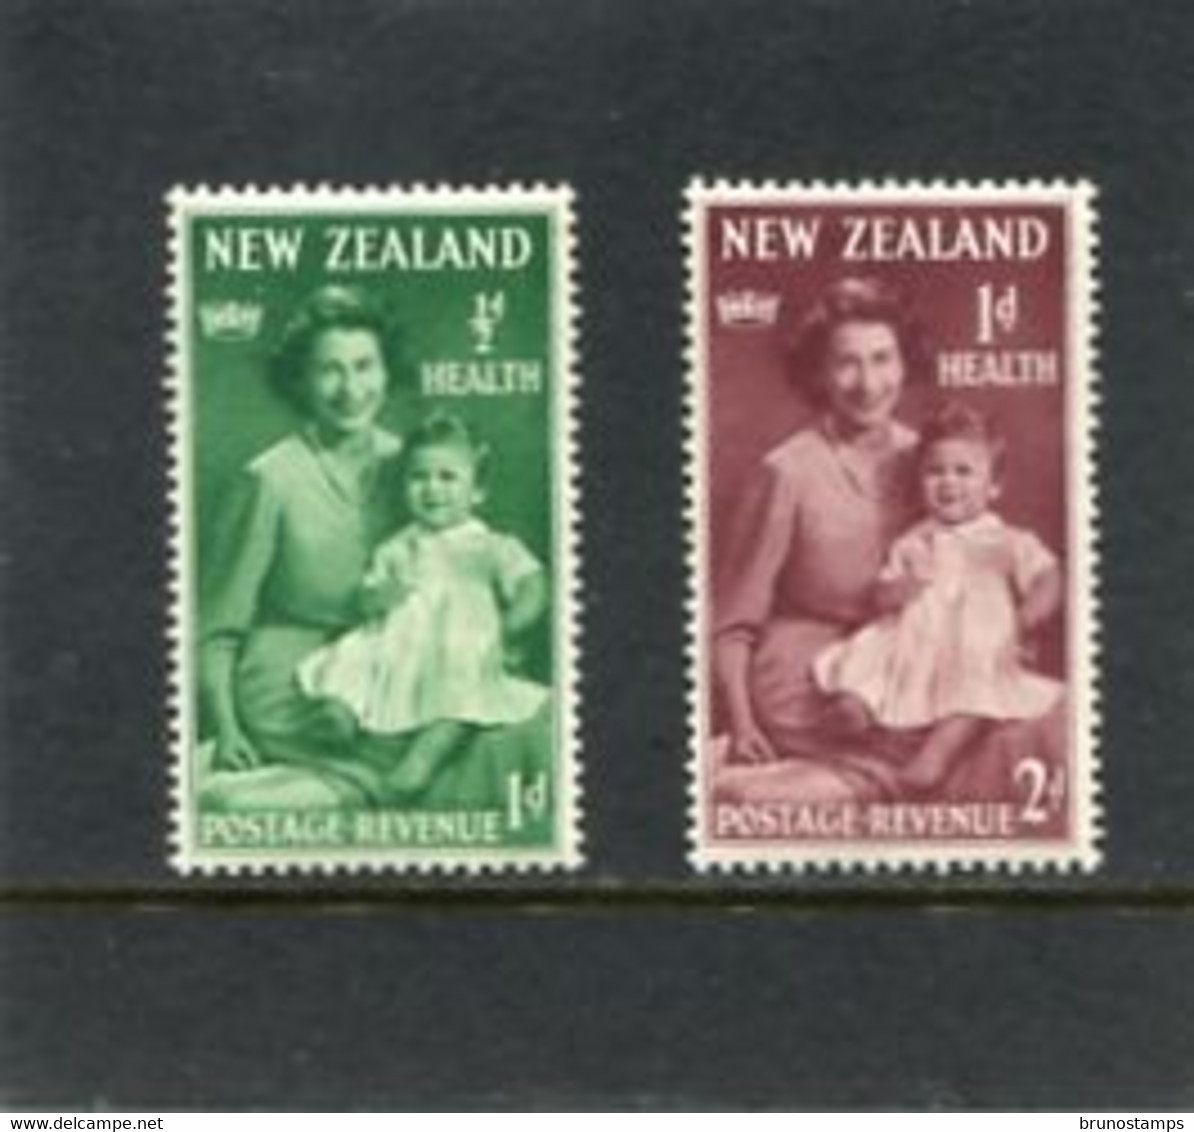 NEW ZEALAND - 1950  HEALTH STAMPS  SET  MINT NH - Neufs